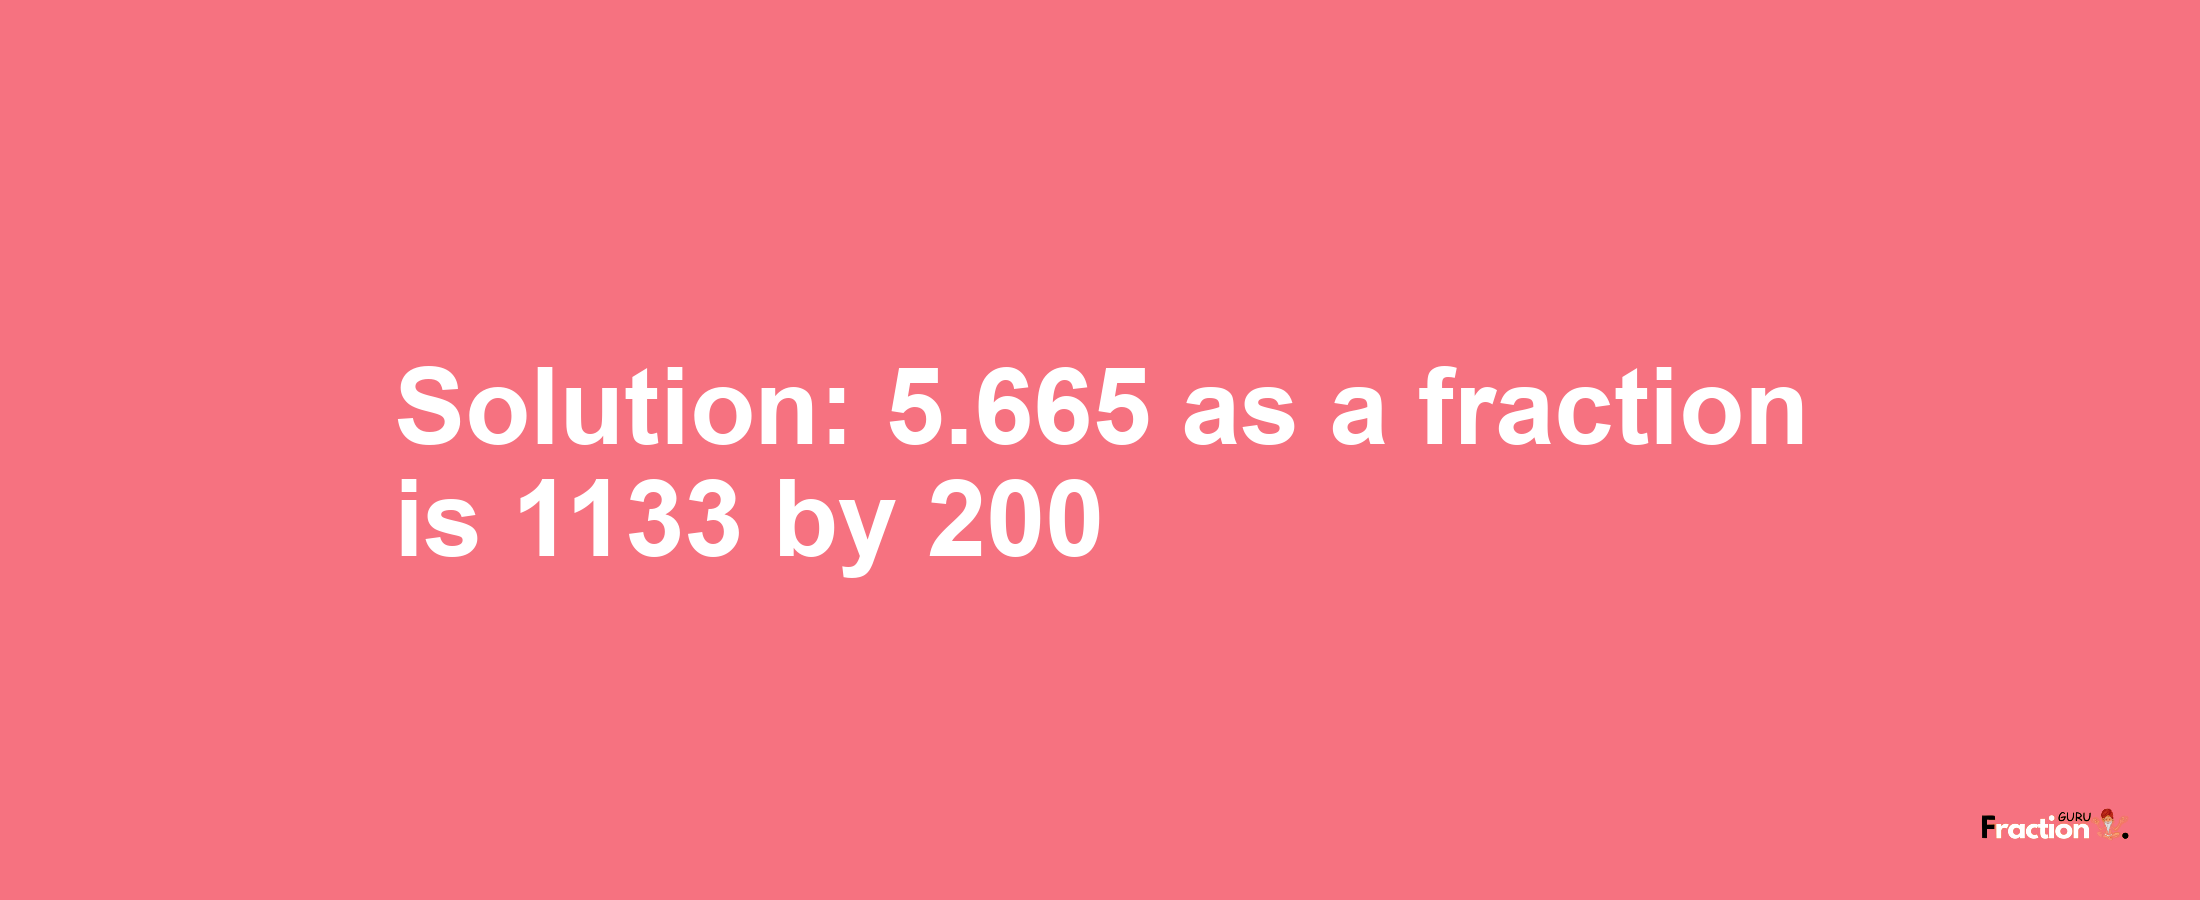 Solution:5.665 as a fraction is 1133/200